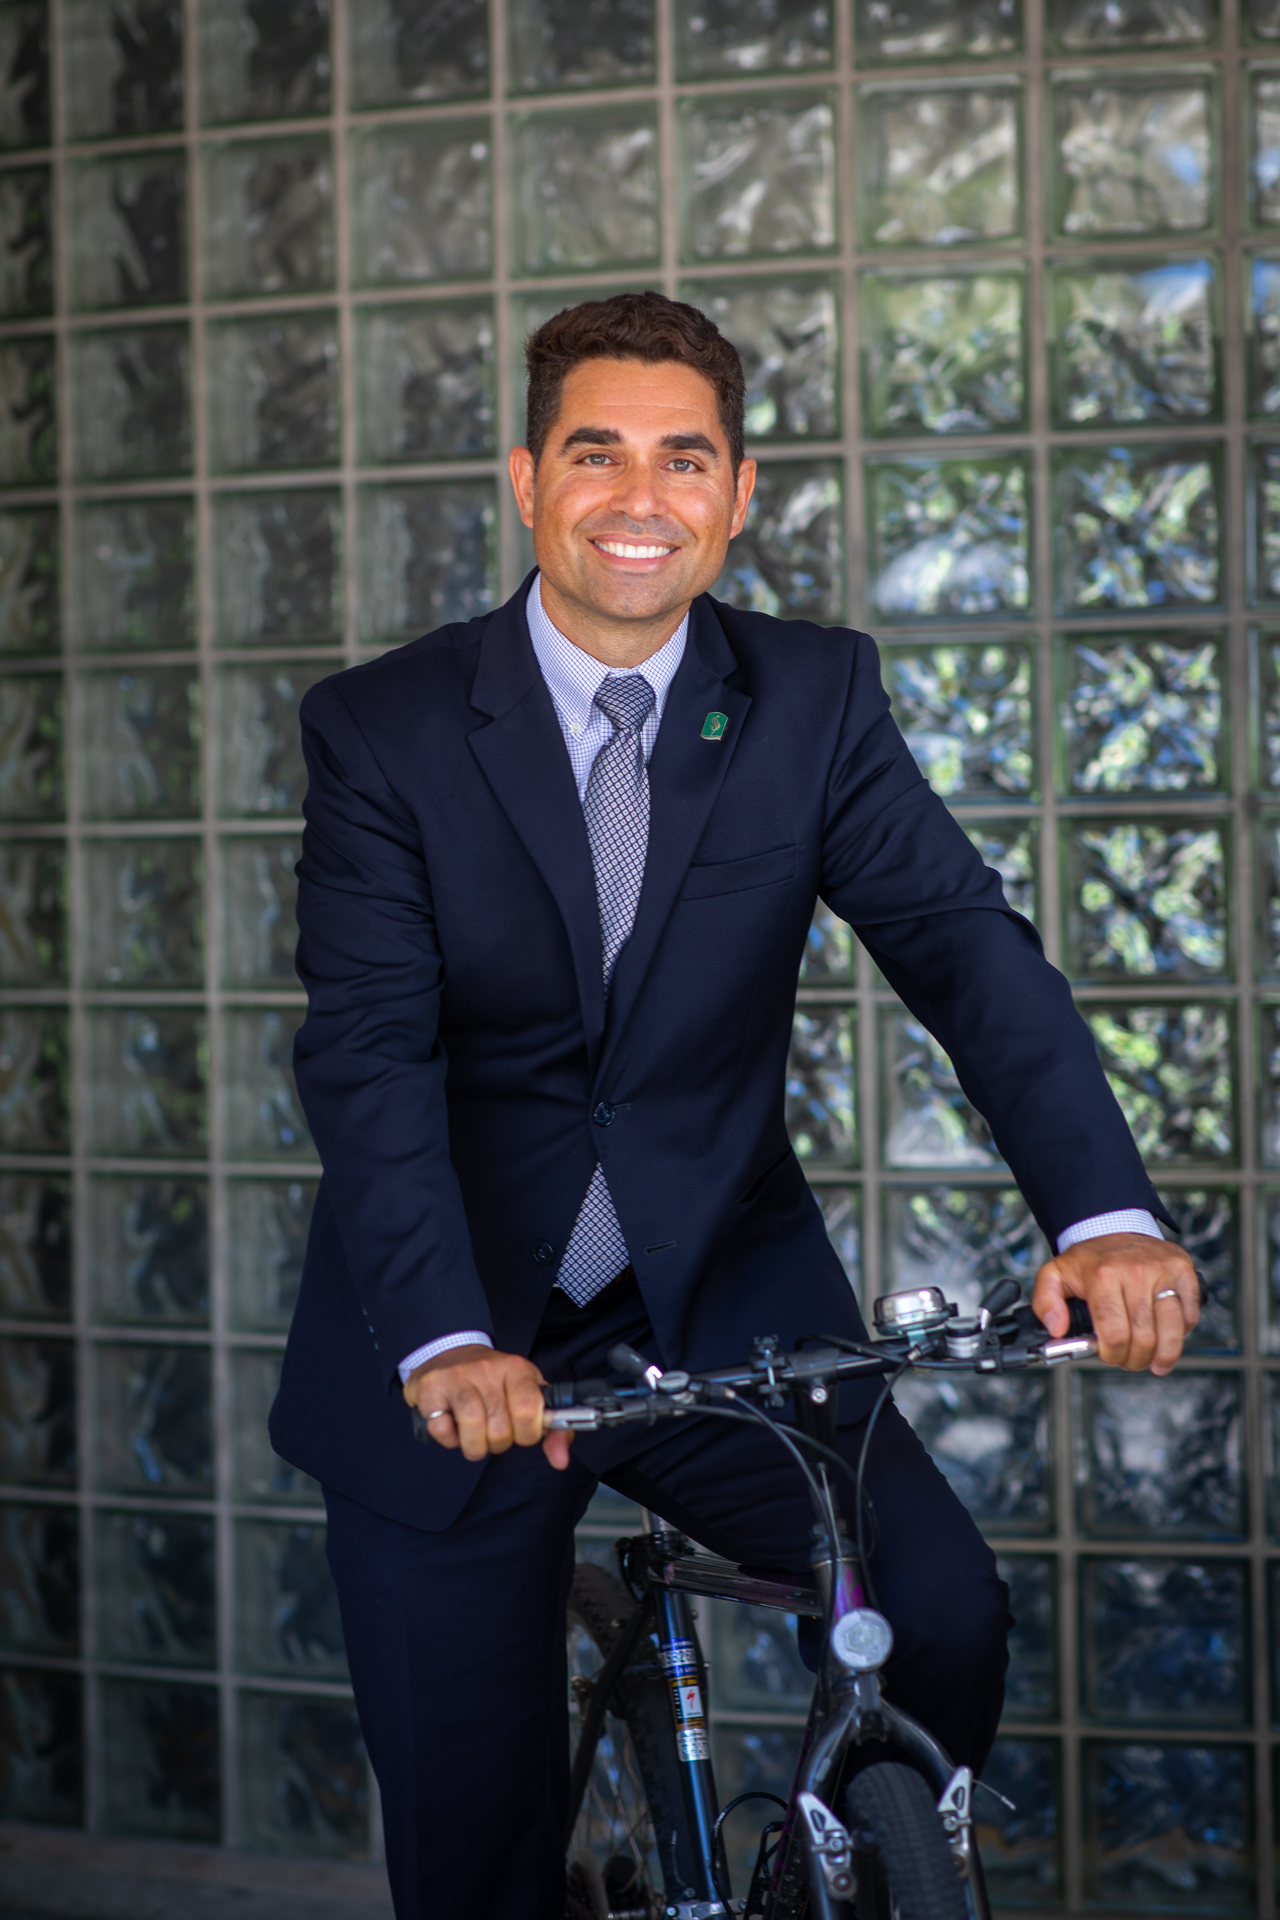 Kevan Shafizadeh, new dean of the College of Engineering and Computer Science (ECS), sits on his bike in front of Riverside Hall at Sacramento State.